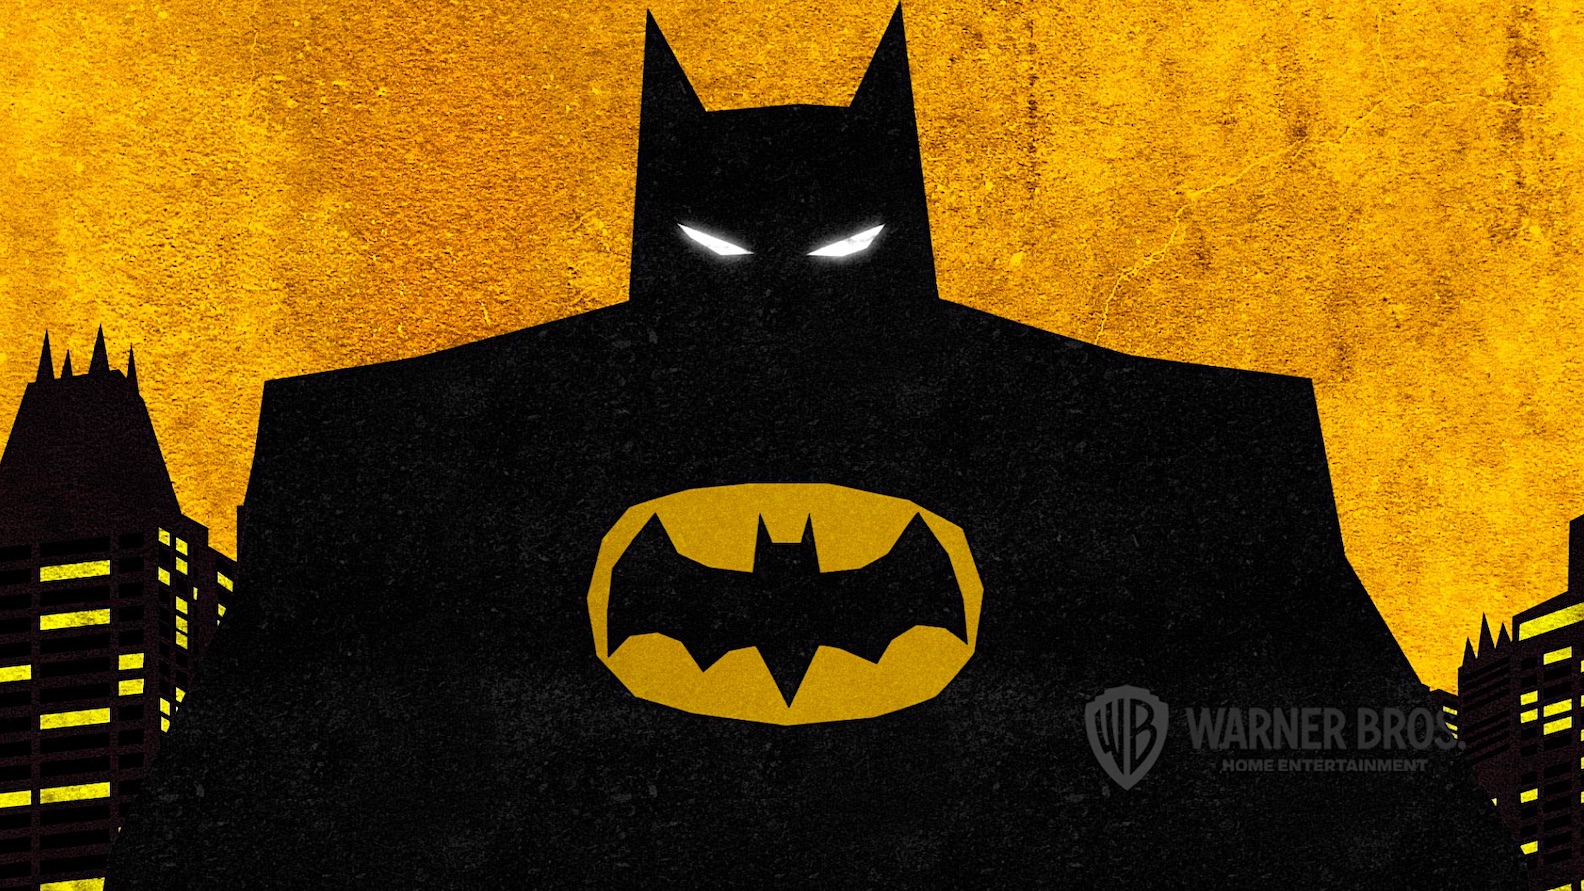 writers can now be hired for projects such as Batman: Brave and the Bold, which currently has a director, but no writer.